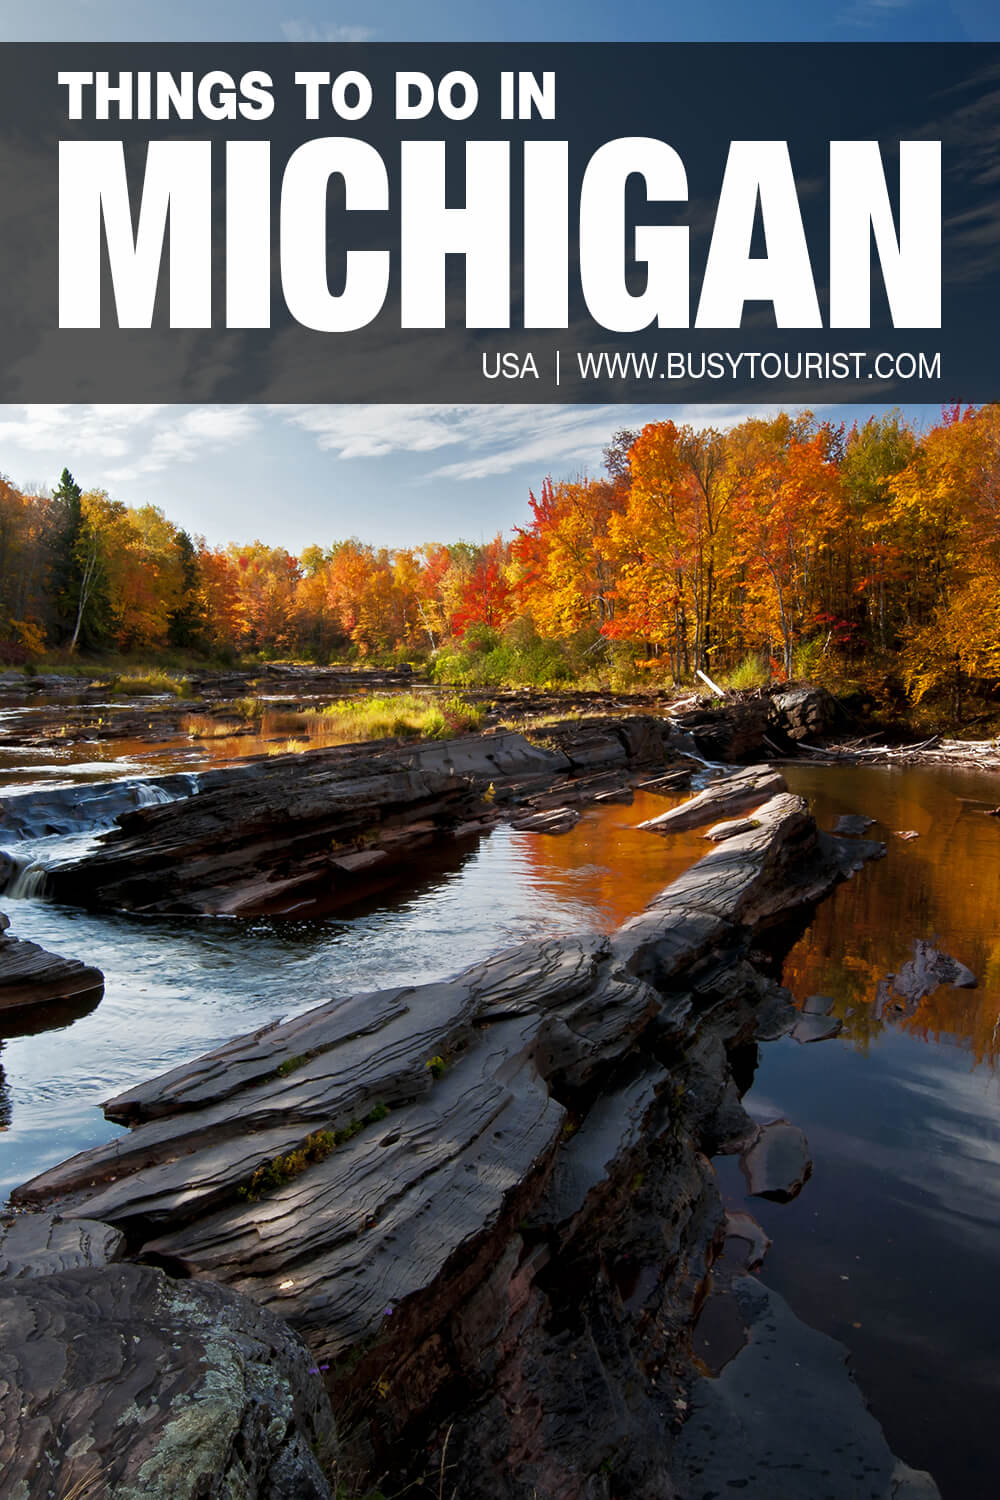 52 Fun Things To Do & Best Places To Visit In Michigan